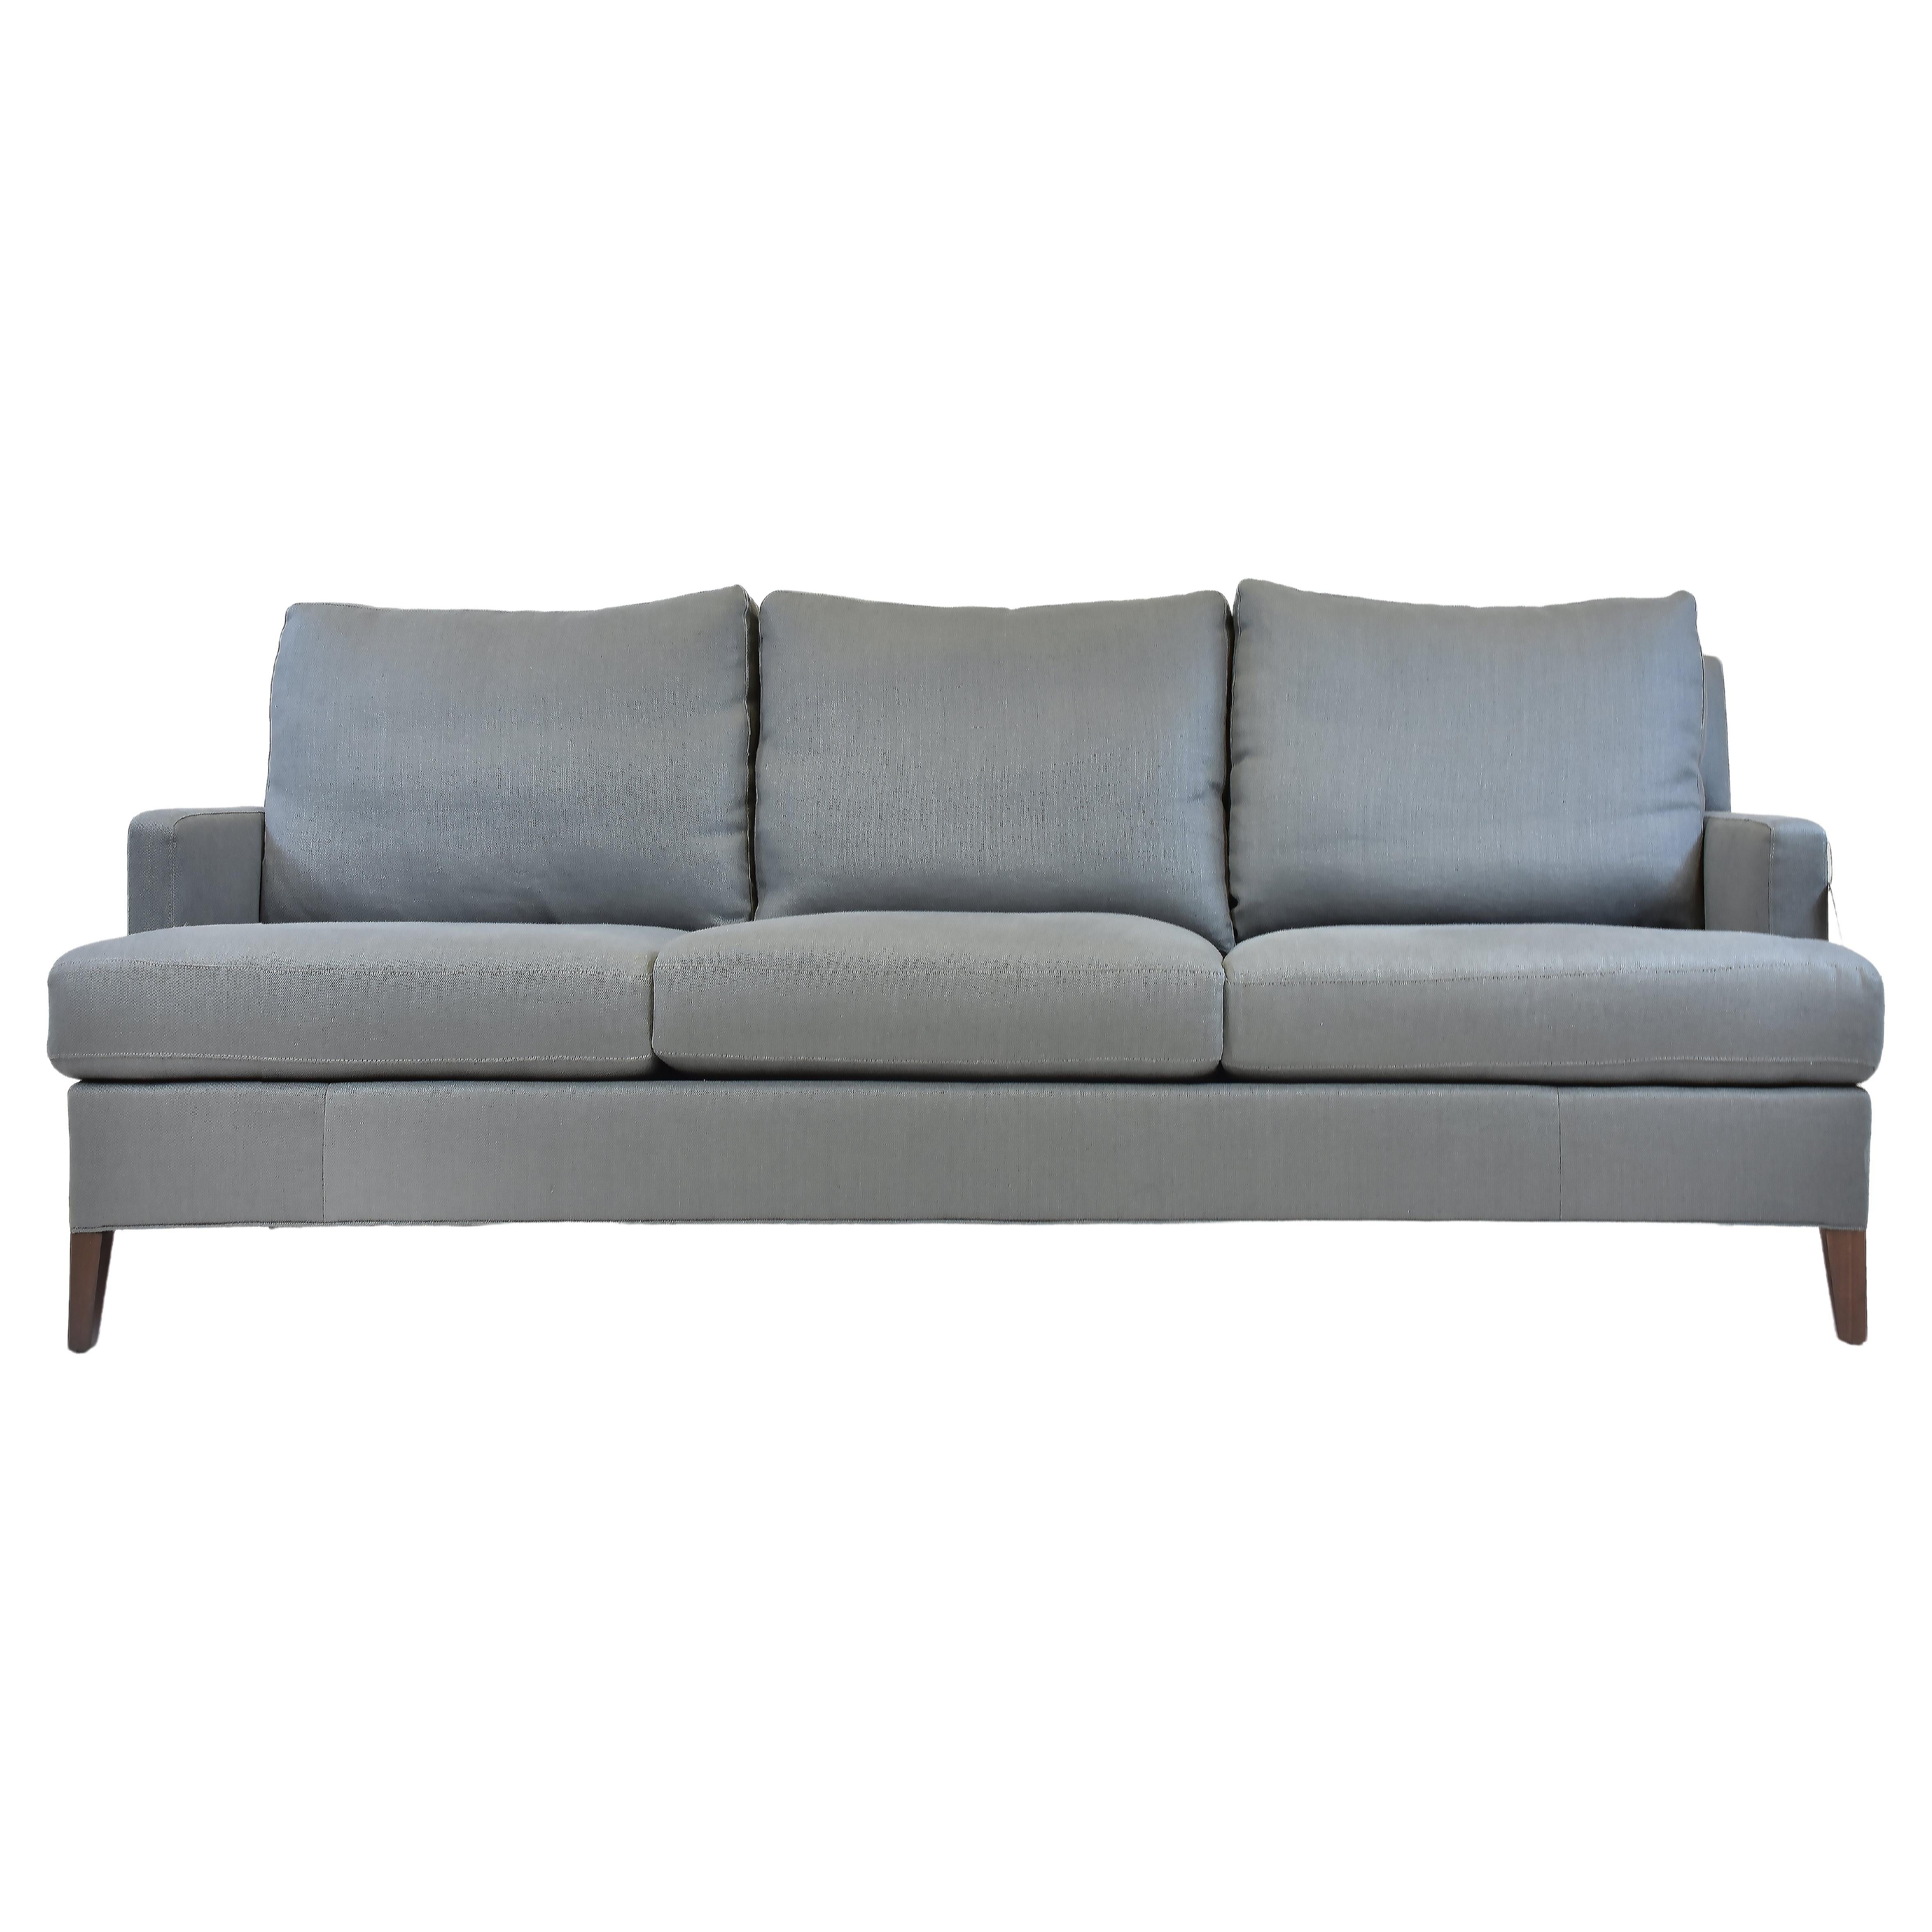 Le Jeune Upholstery Hollywood Sofa Showroom Model For Sale